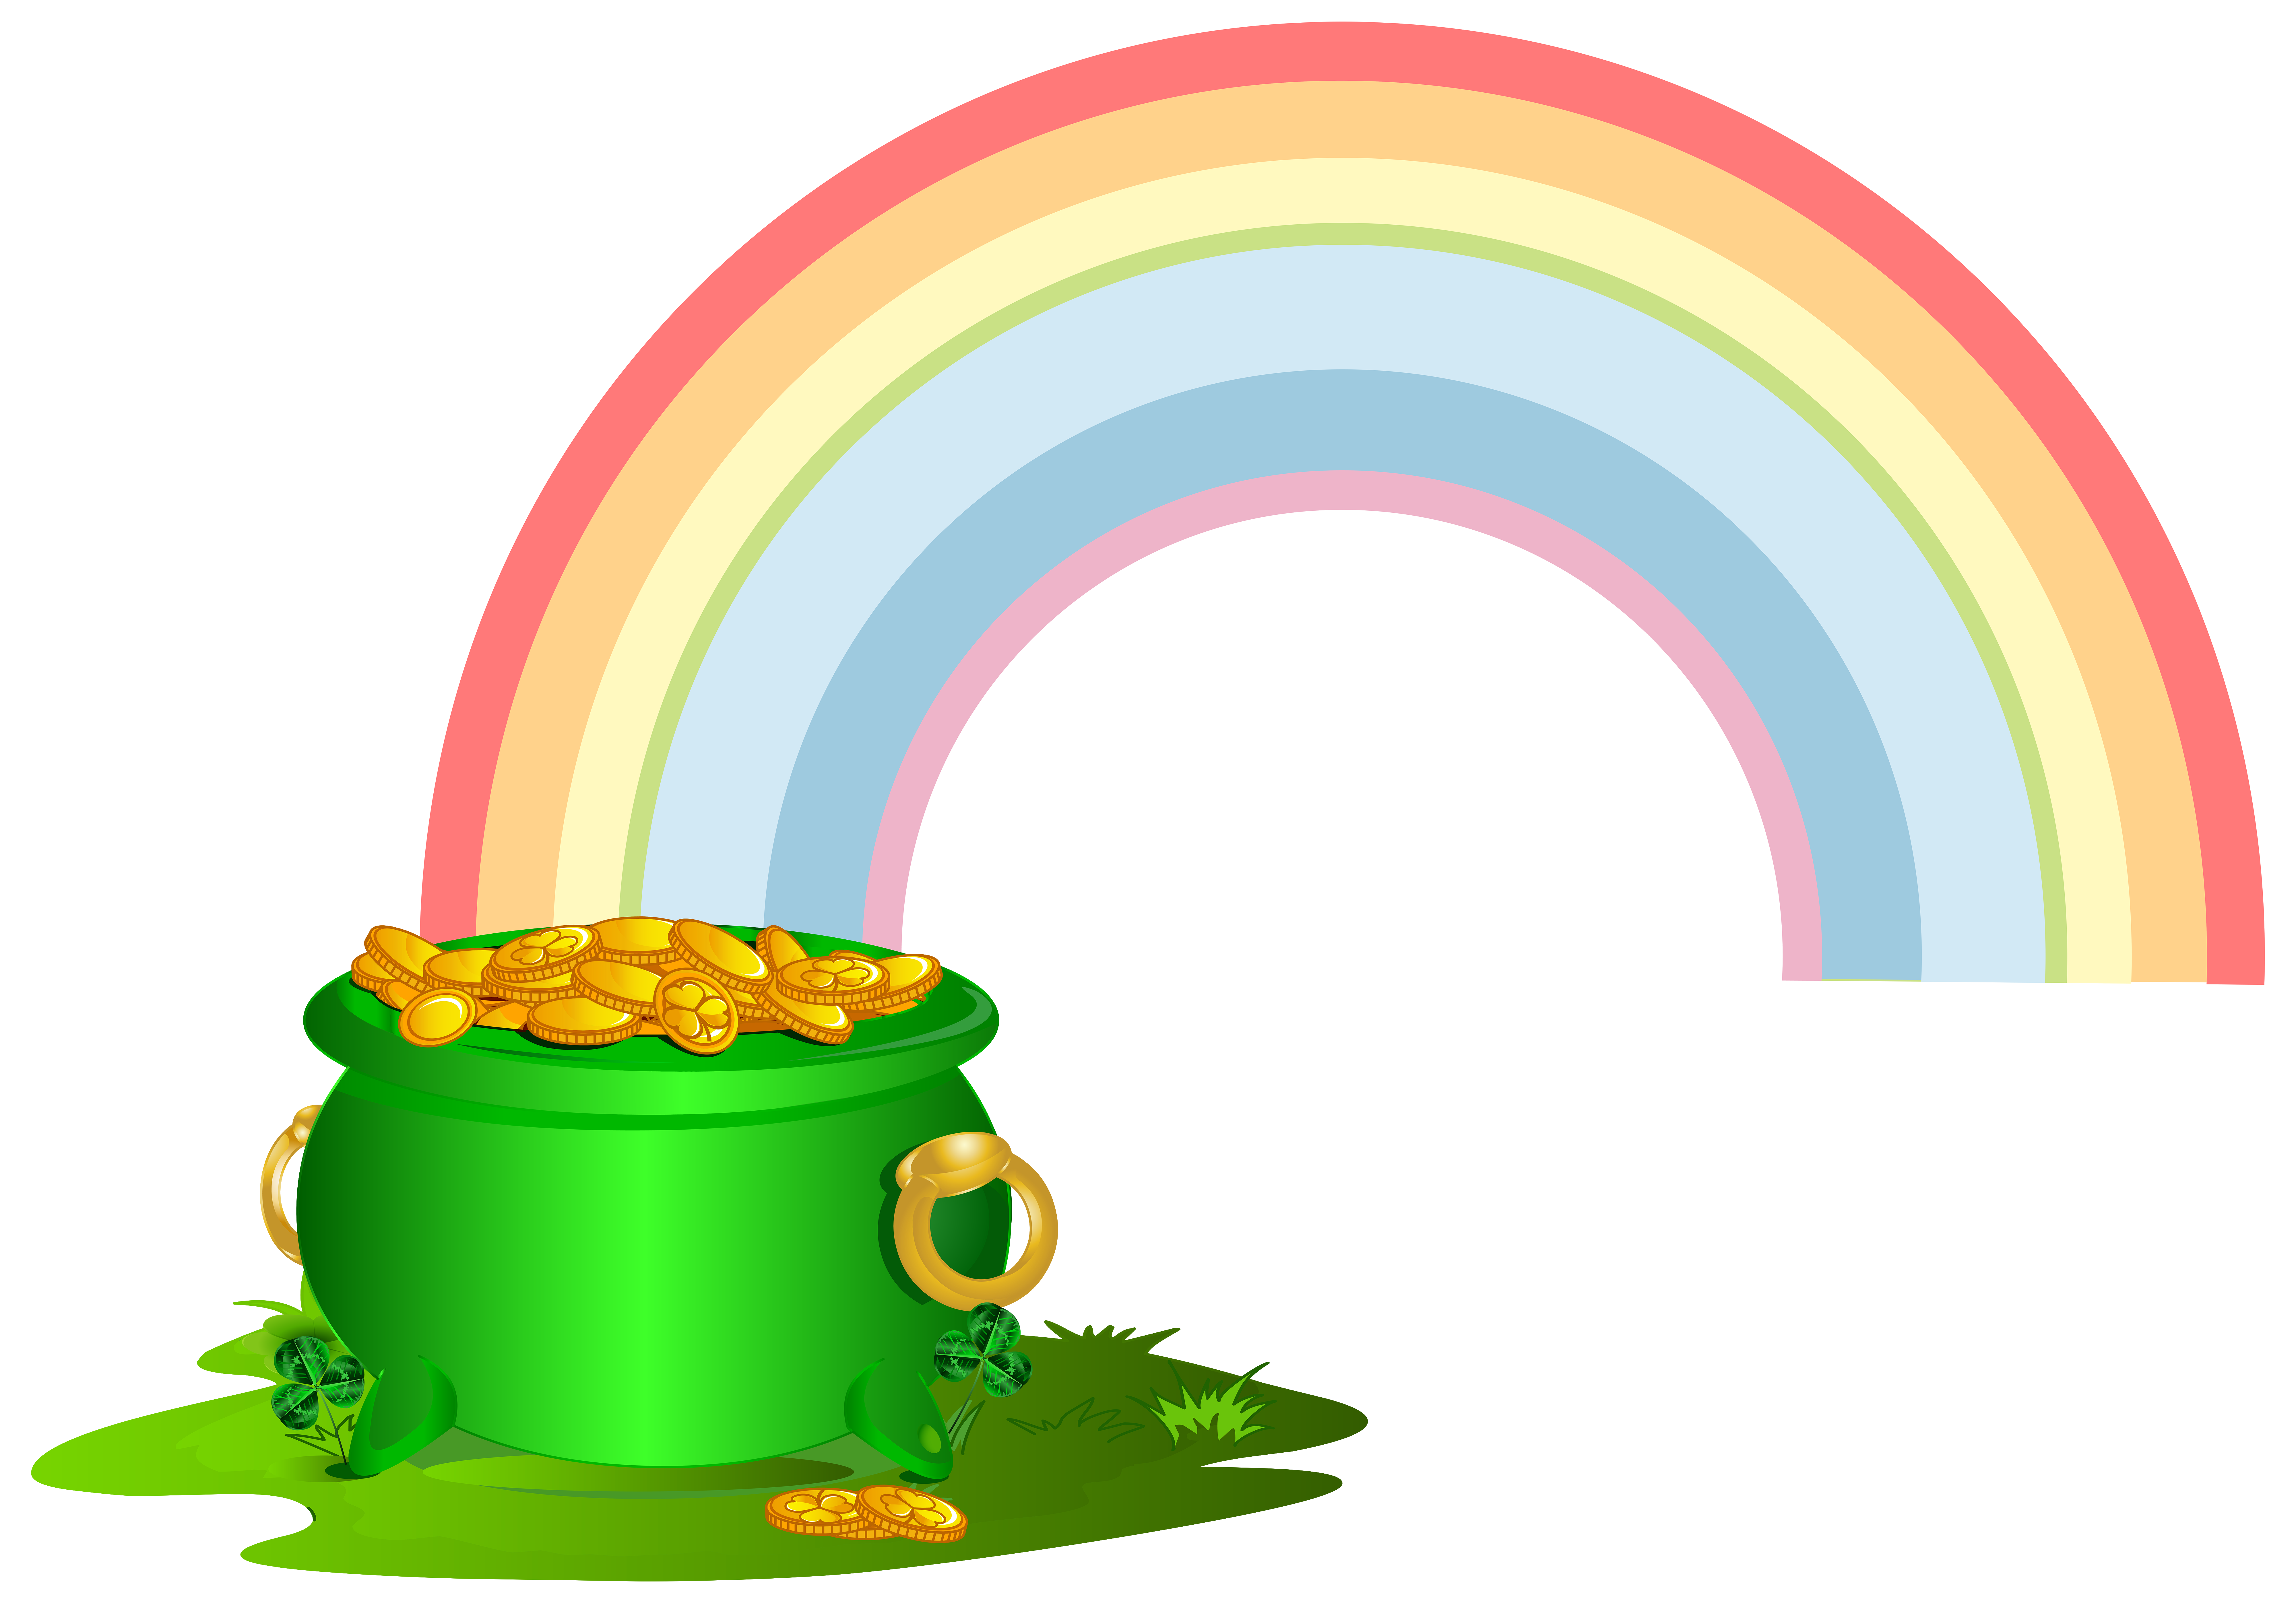 Green Pot of Gold with Rainbow PNG Clip Art Image